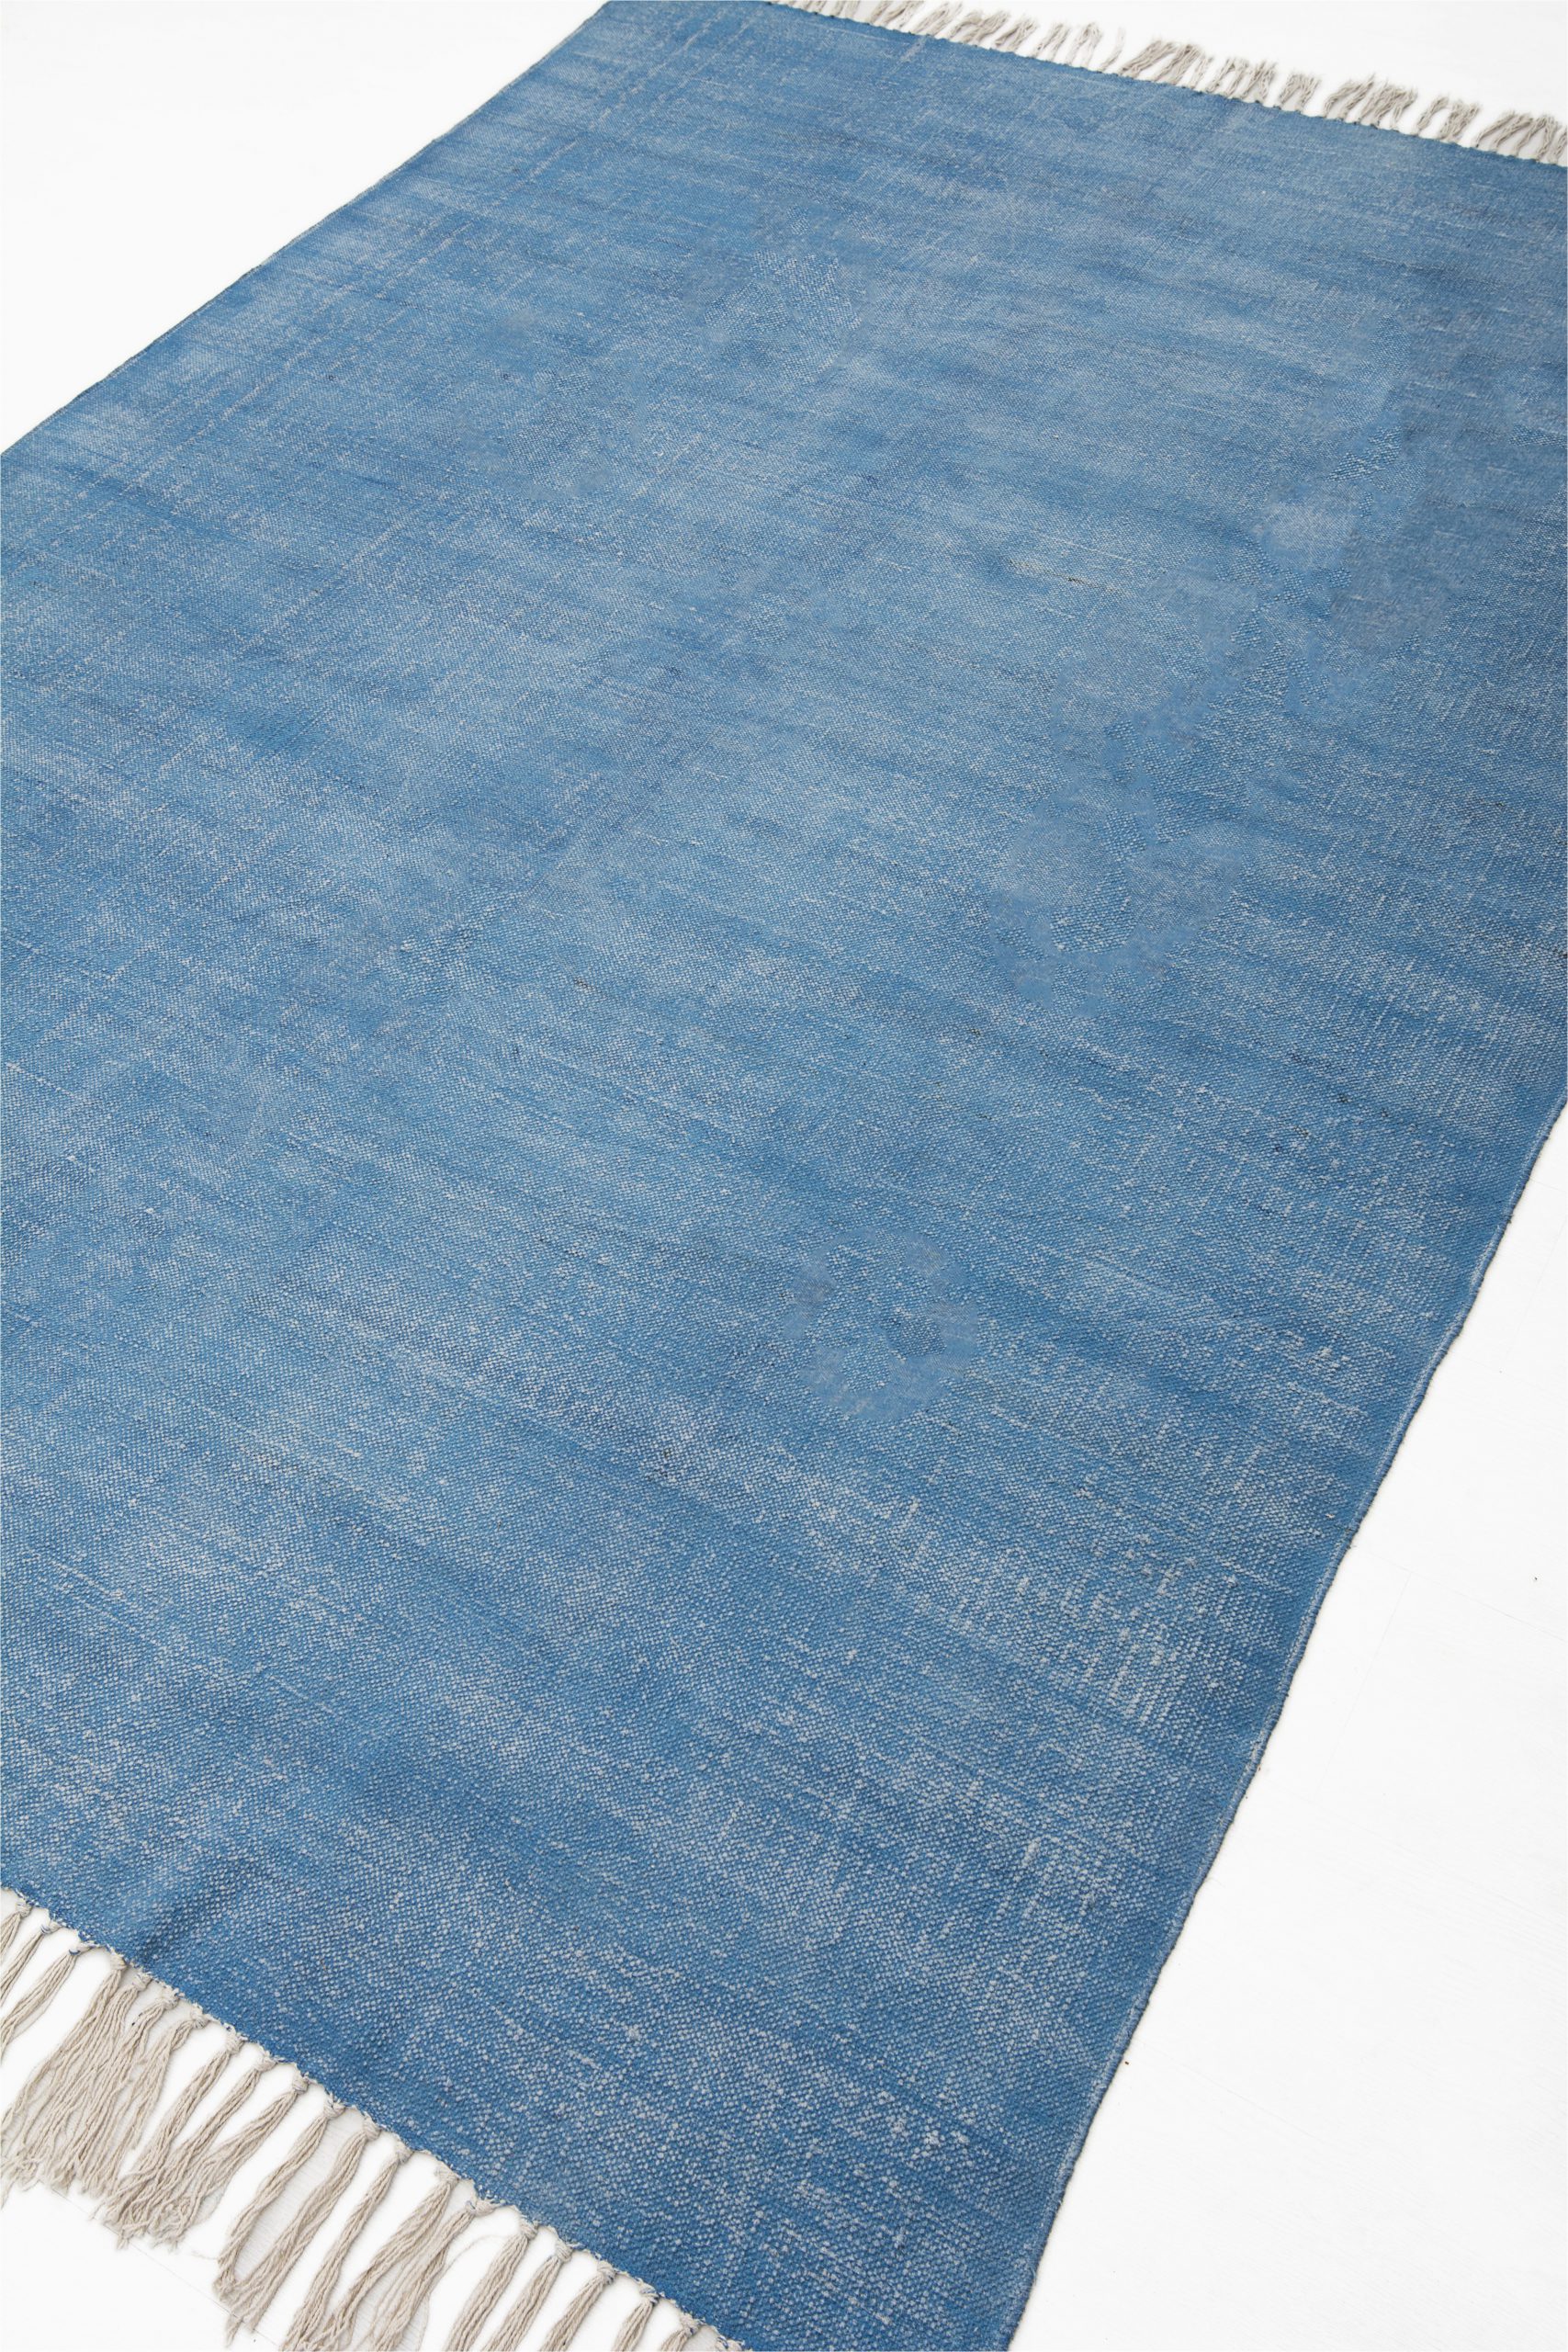 Solid Blue Wool Rug solid Blue Cotton Rug for Home Decor